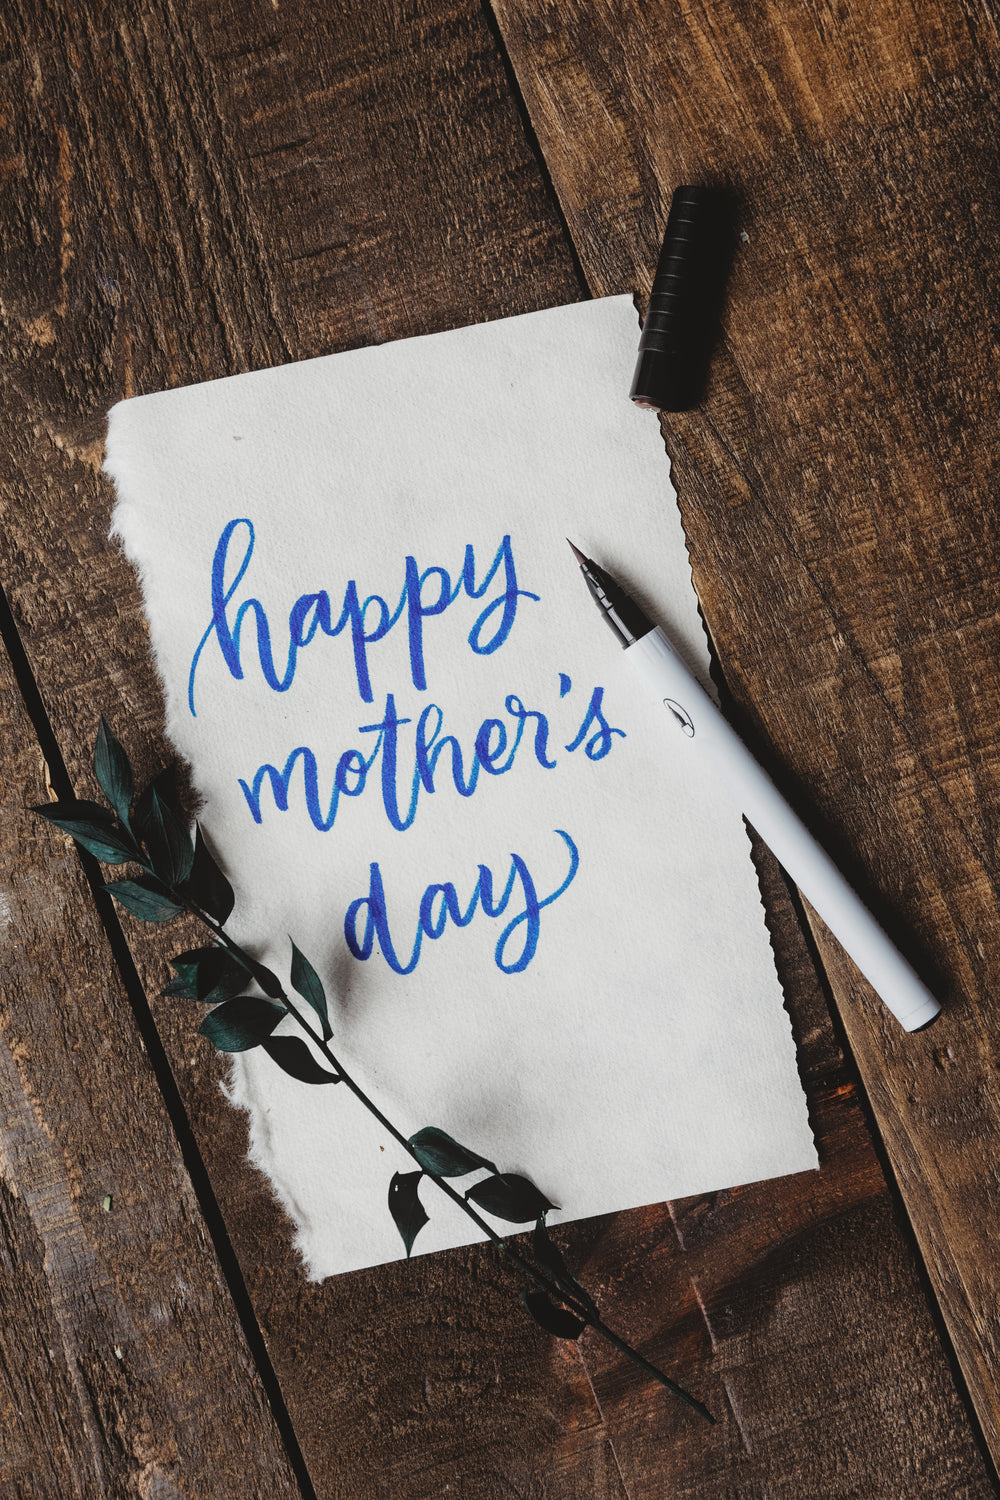 cursive handwriting wishing a happy mother's day